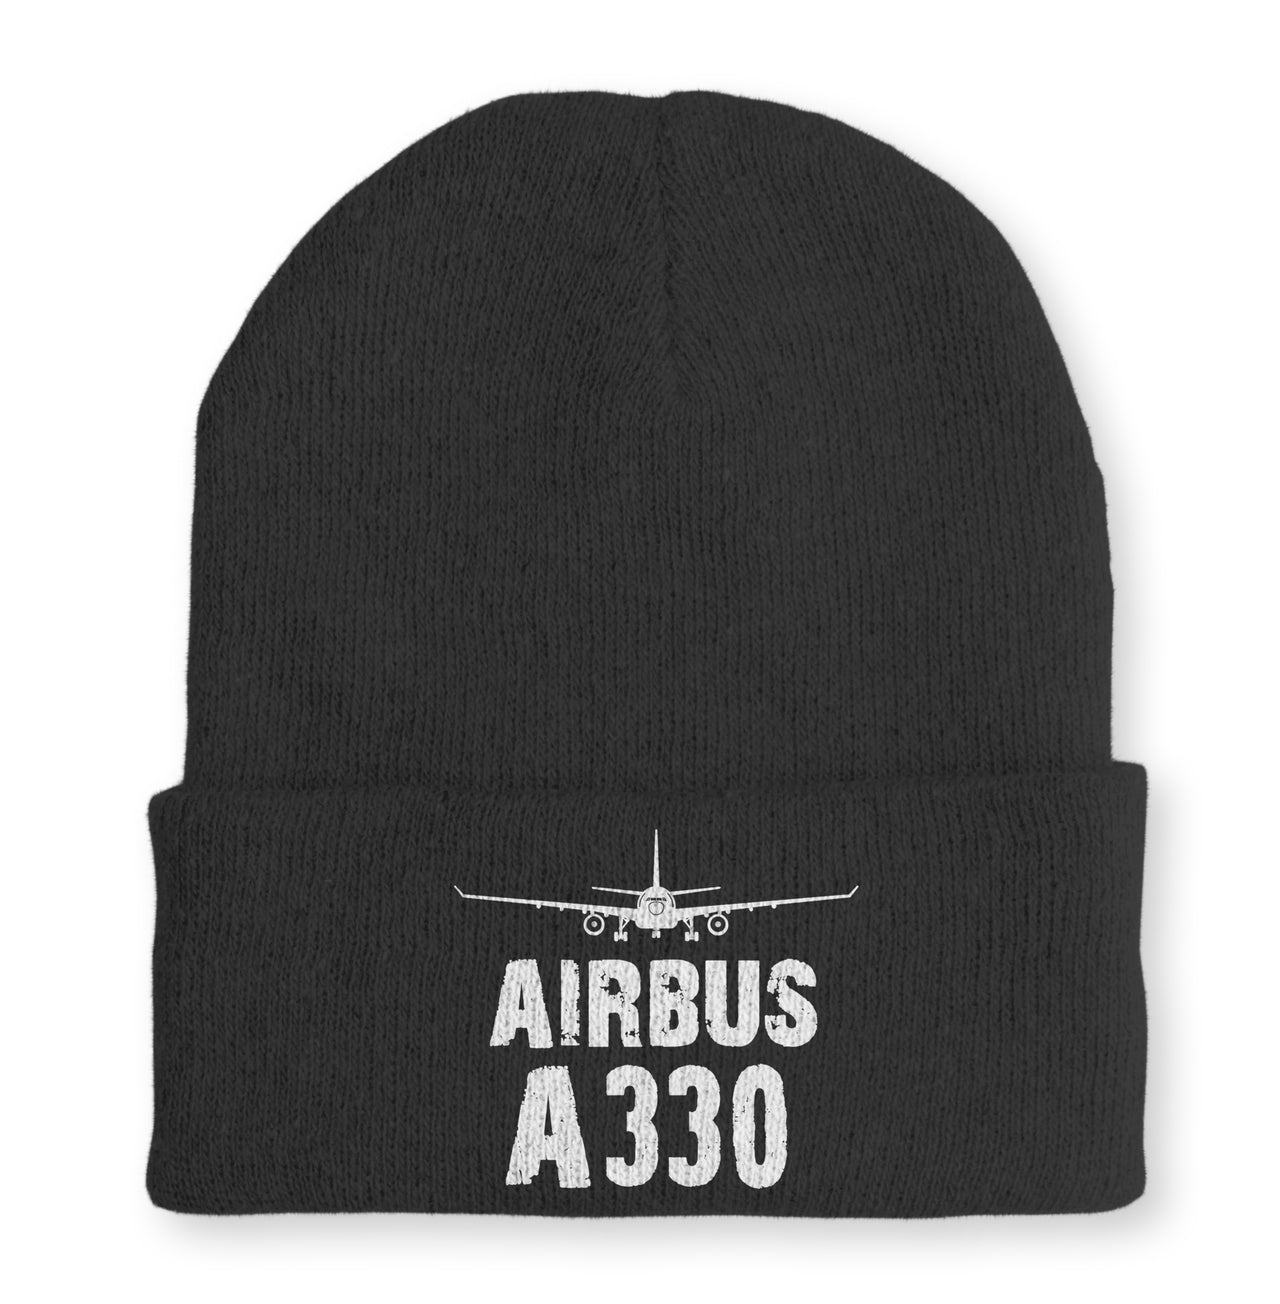 Airbus A330 & Plane Embroidered Beanies